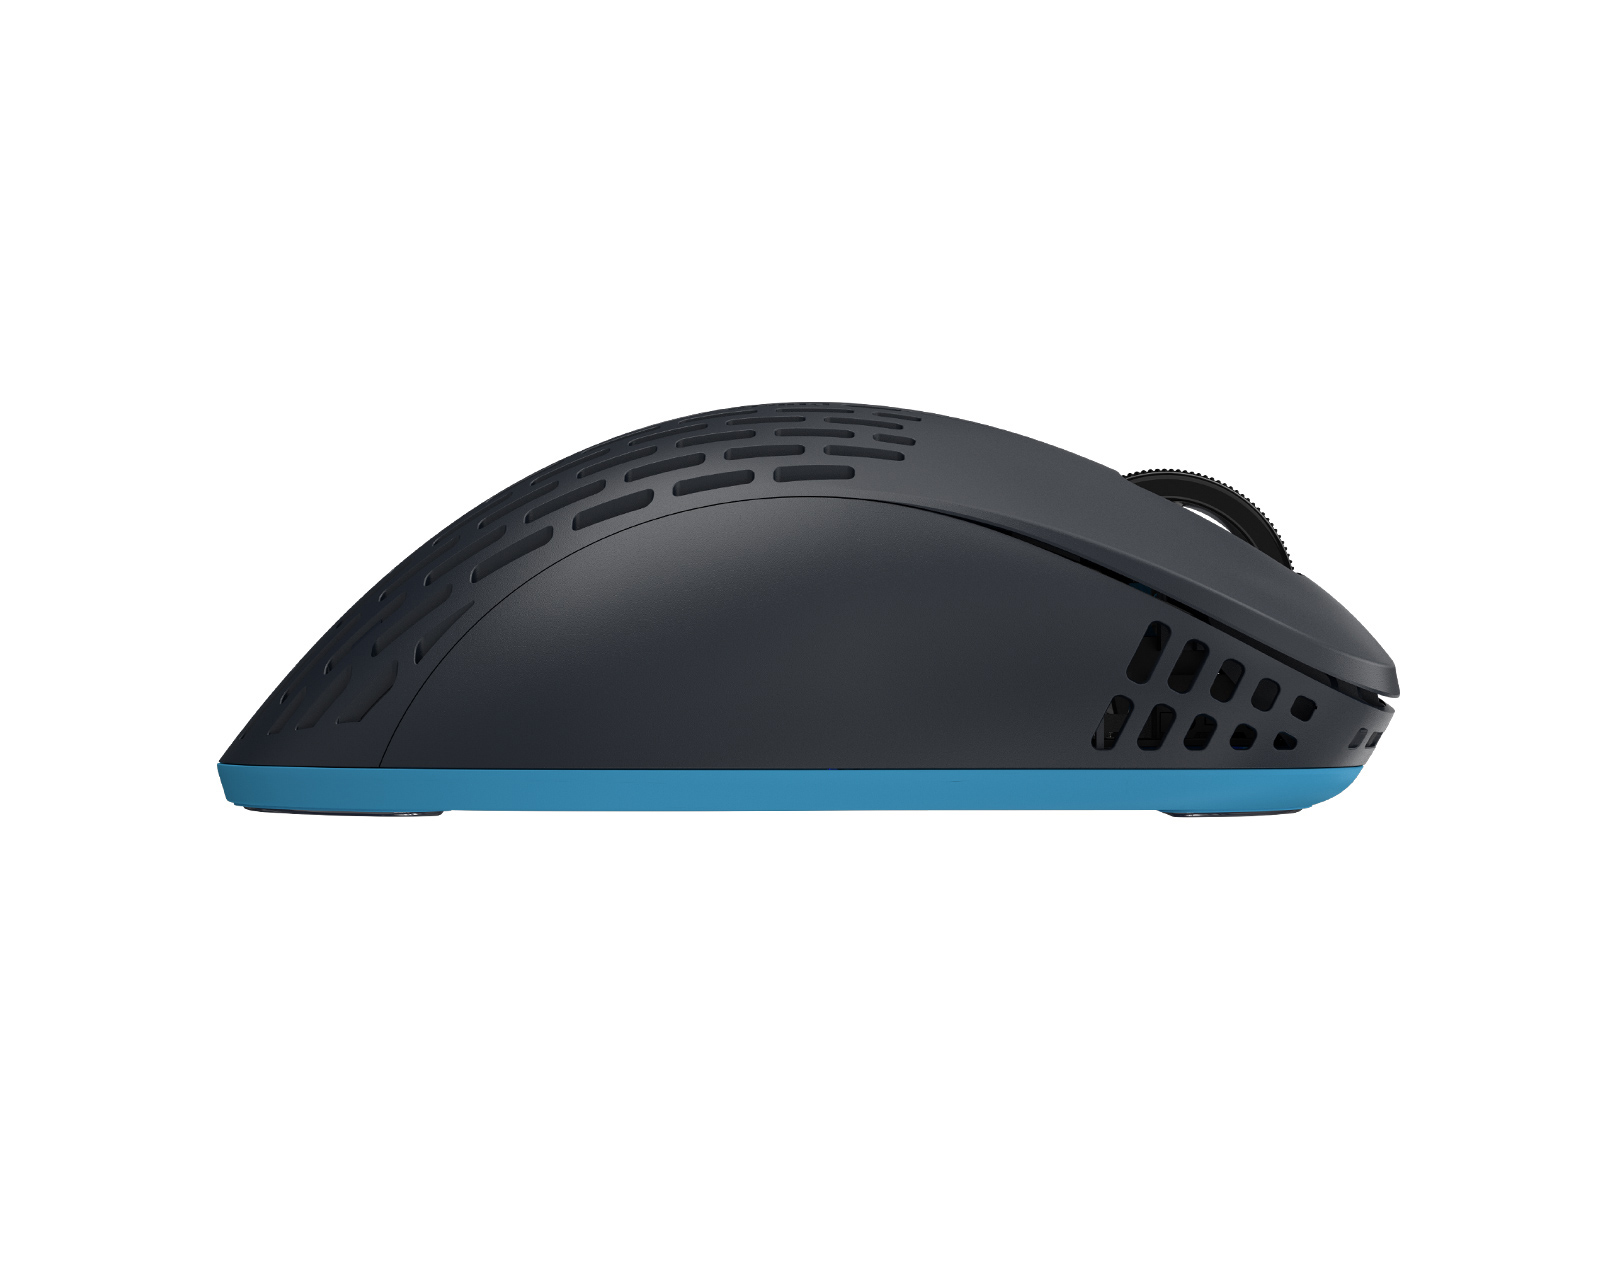 Pulsar Xlite Wireless v2 Mini Superglide Gaming Mouse - MxG Limited Edition